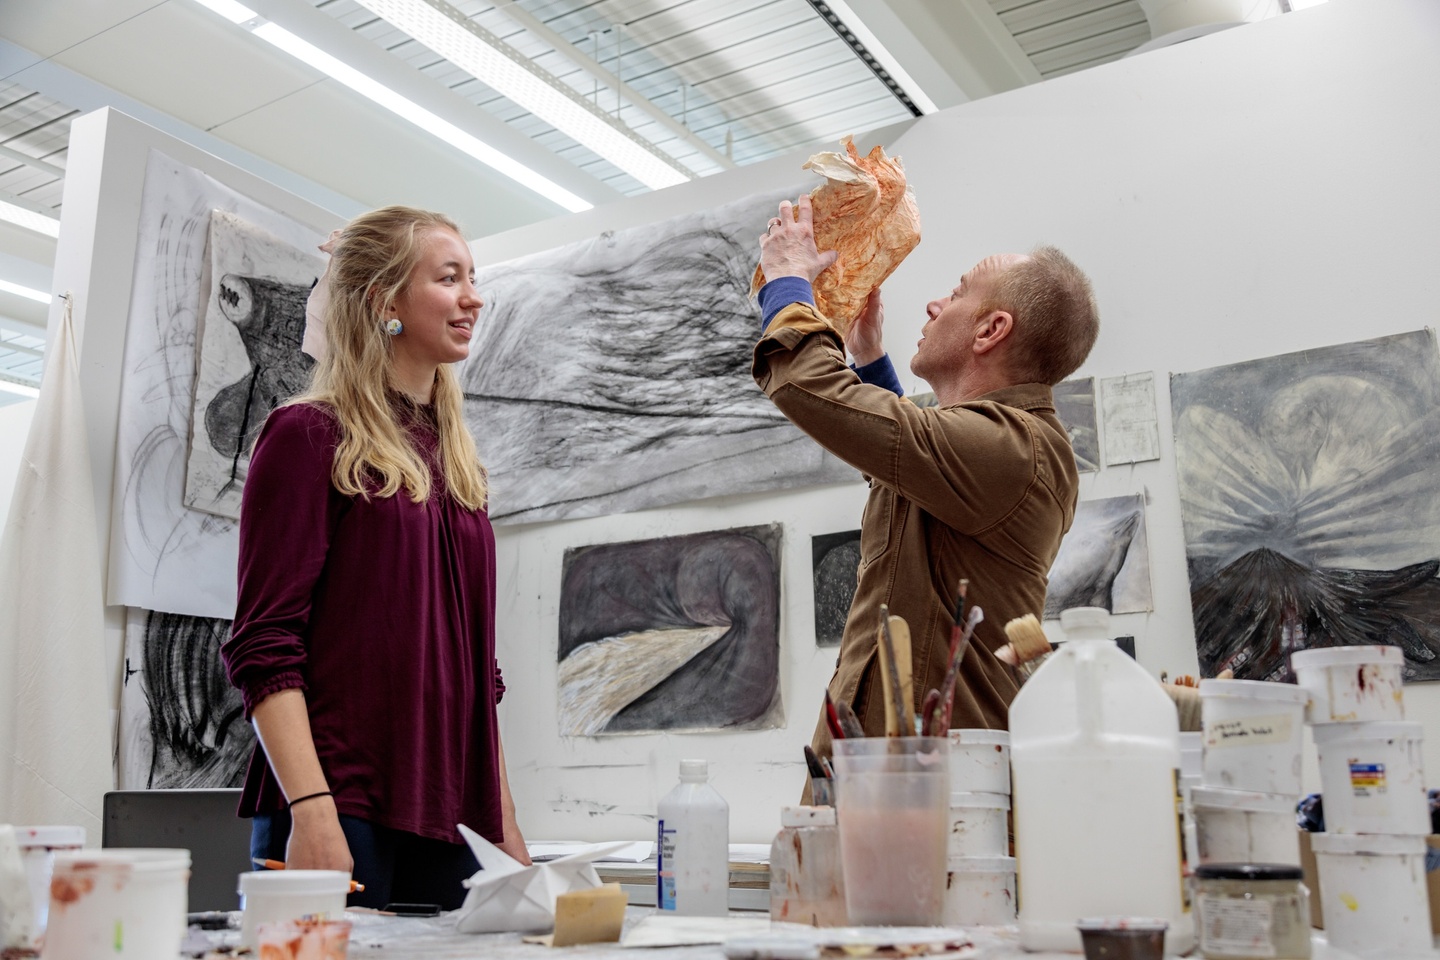 Professor and student in the student's brightly lit studio space; the professor is holding a sculptural object in the air and looking at it closely.